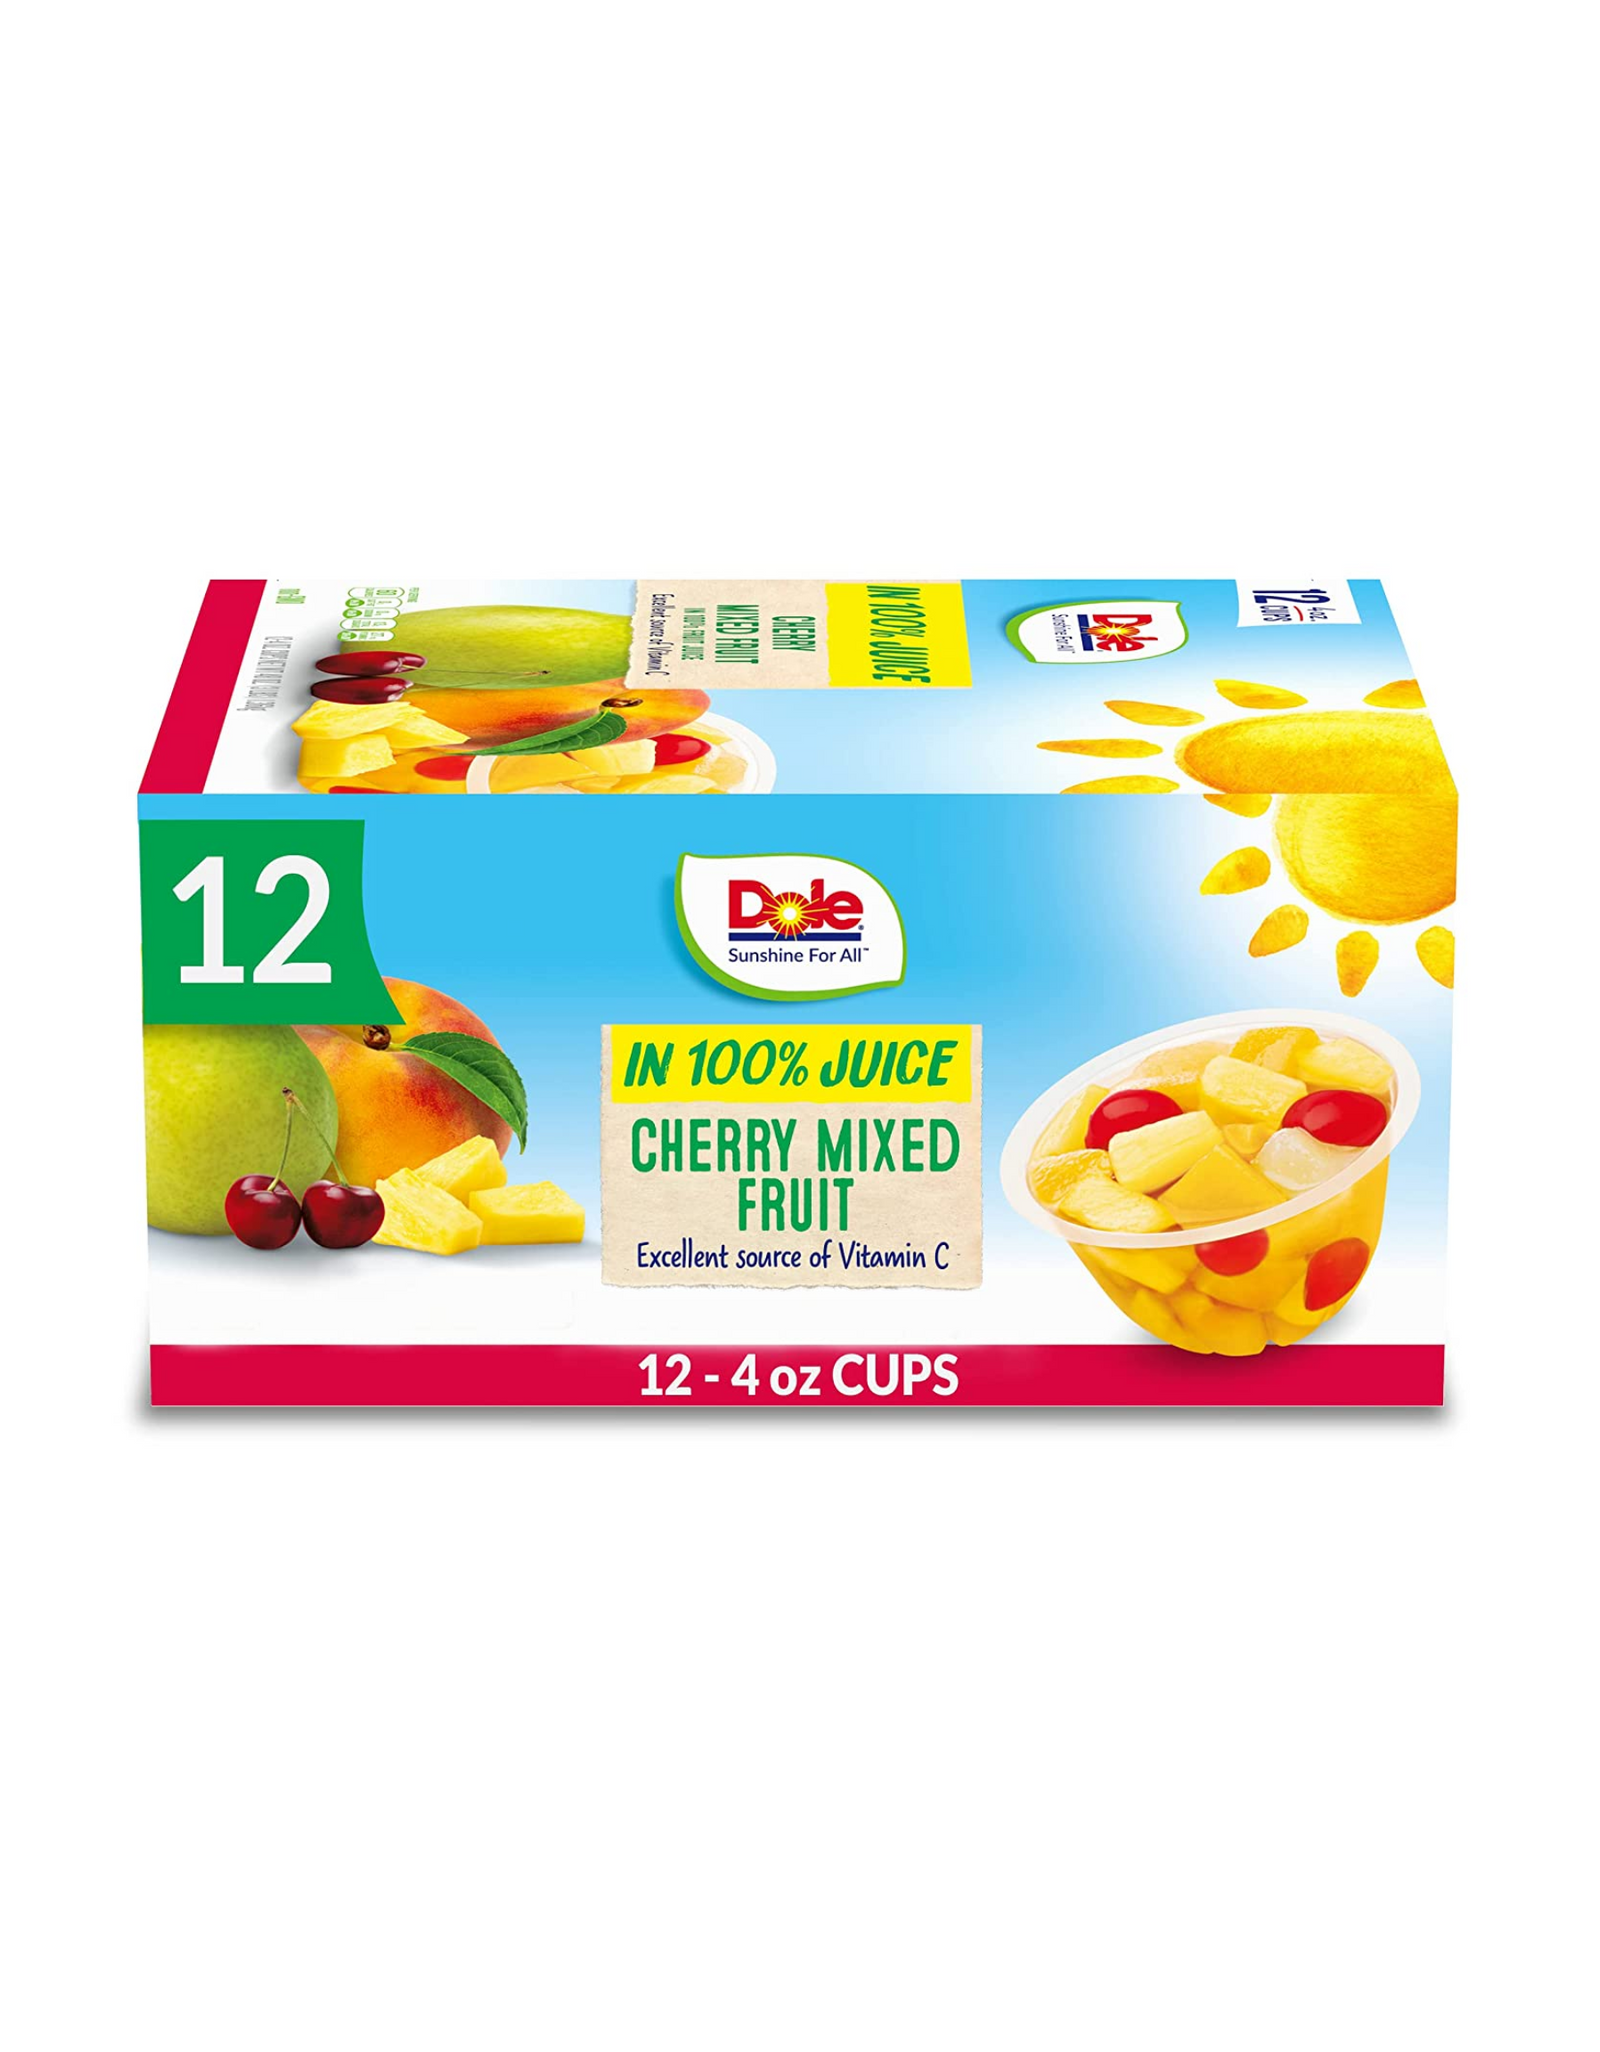 Dole Fruit Bowls Cherry Mixed Fruit In 100% Juice Cups, 4 oz, 12 Count